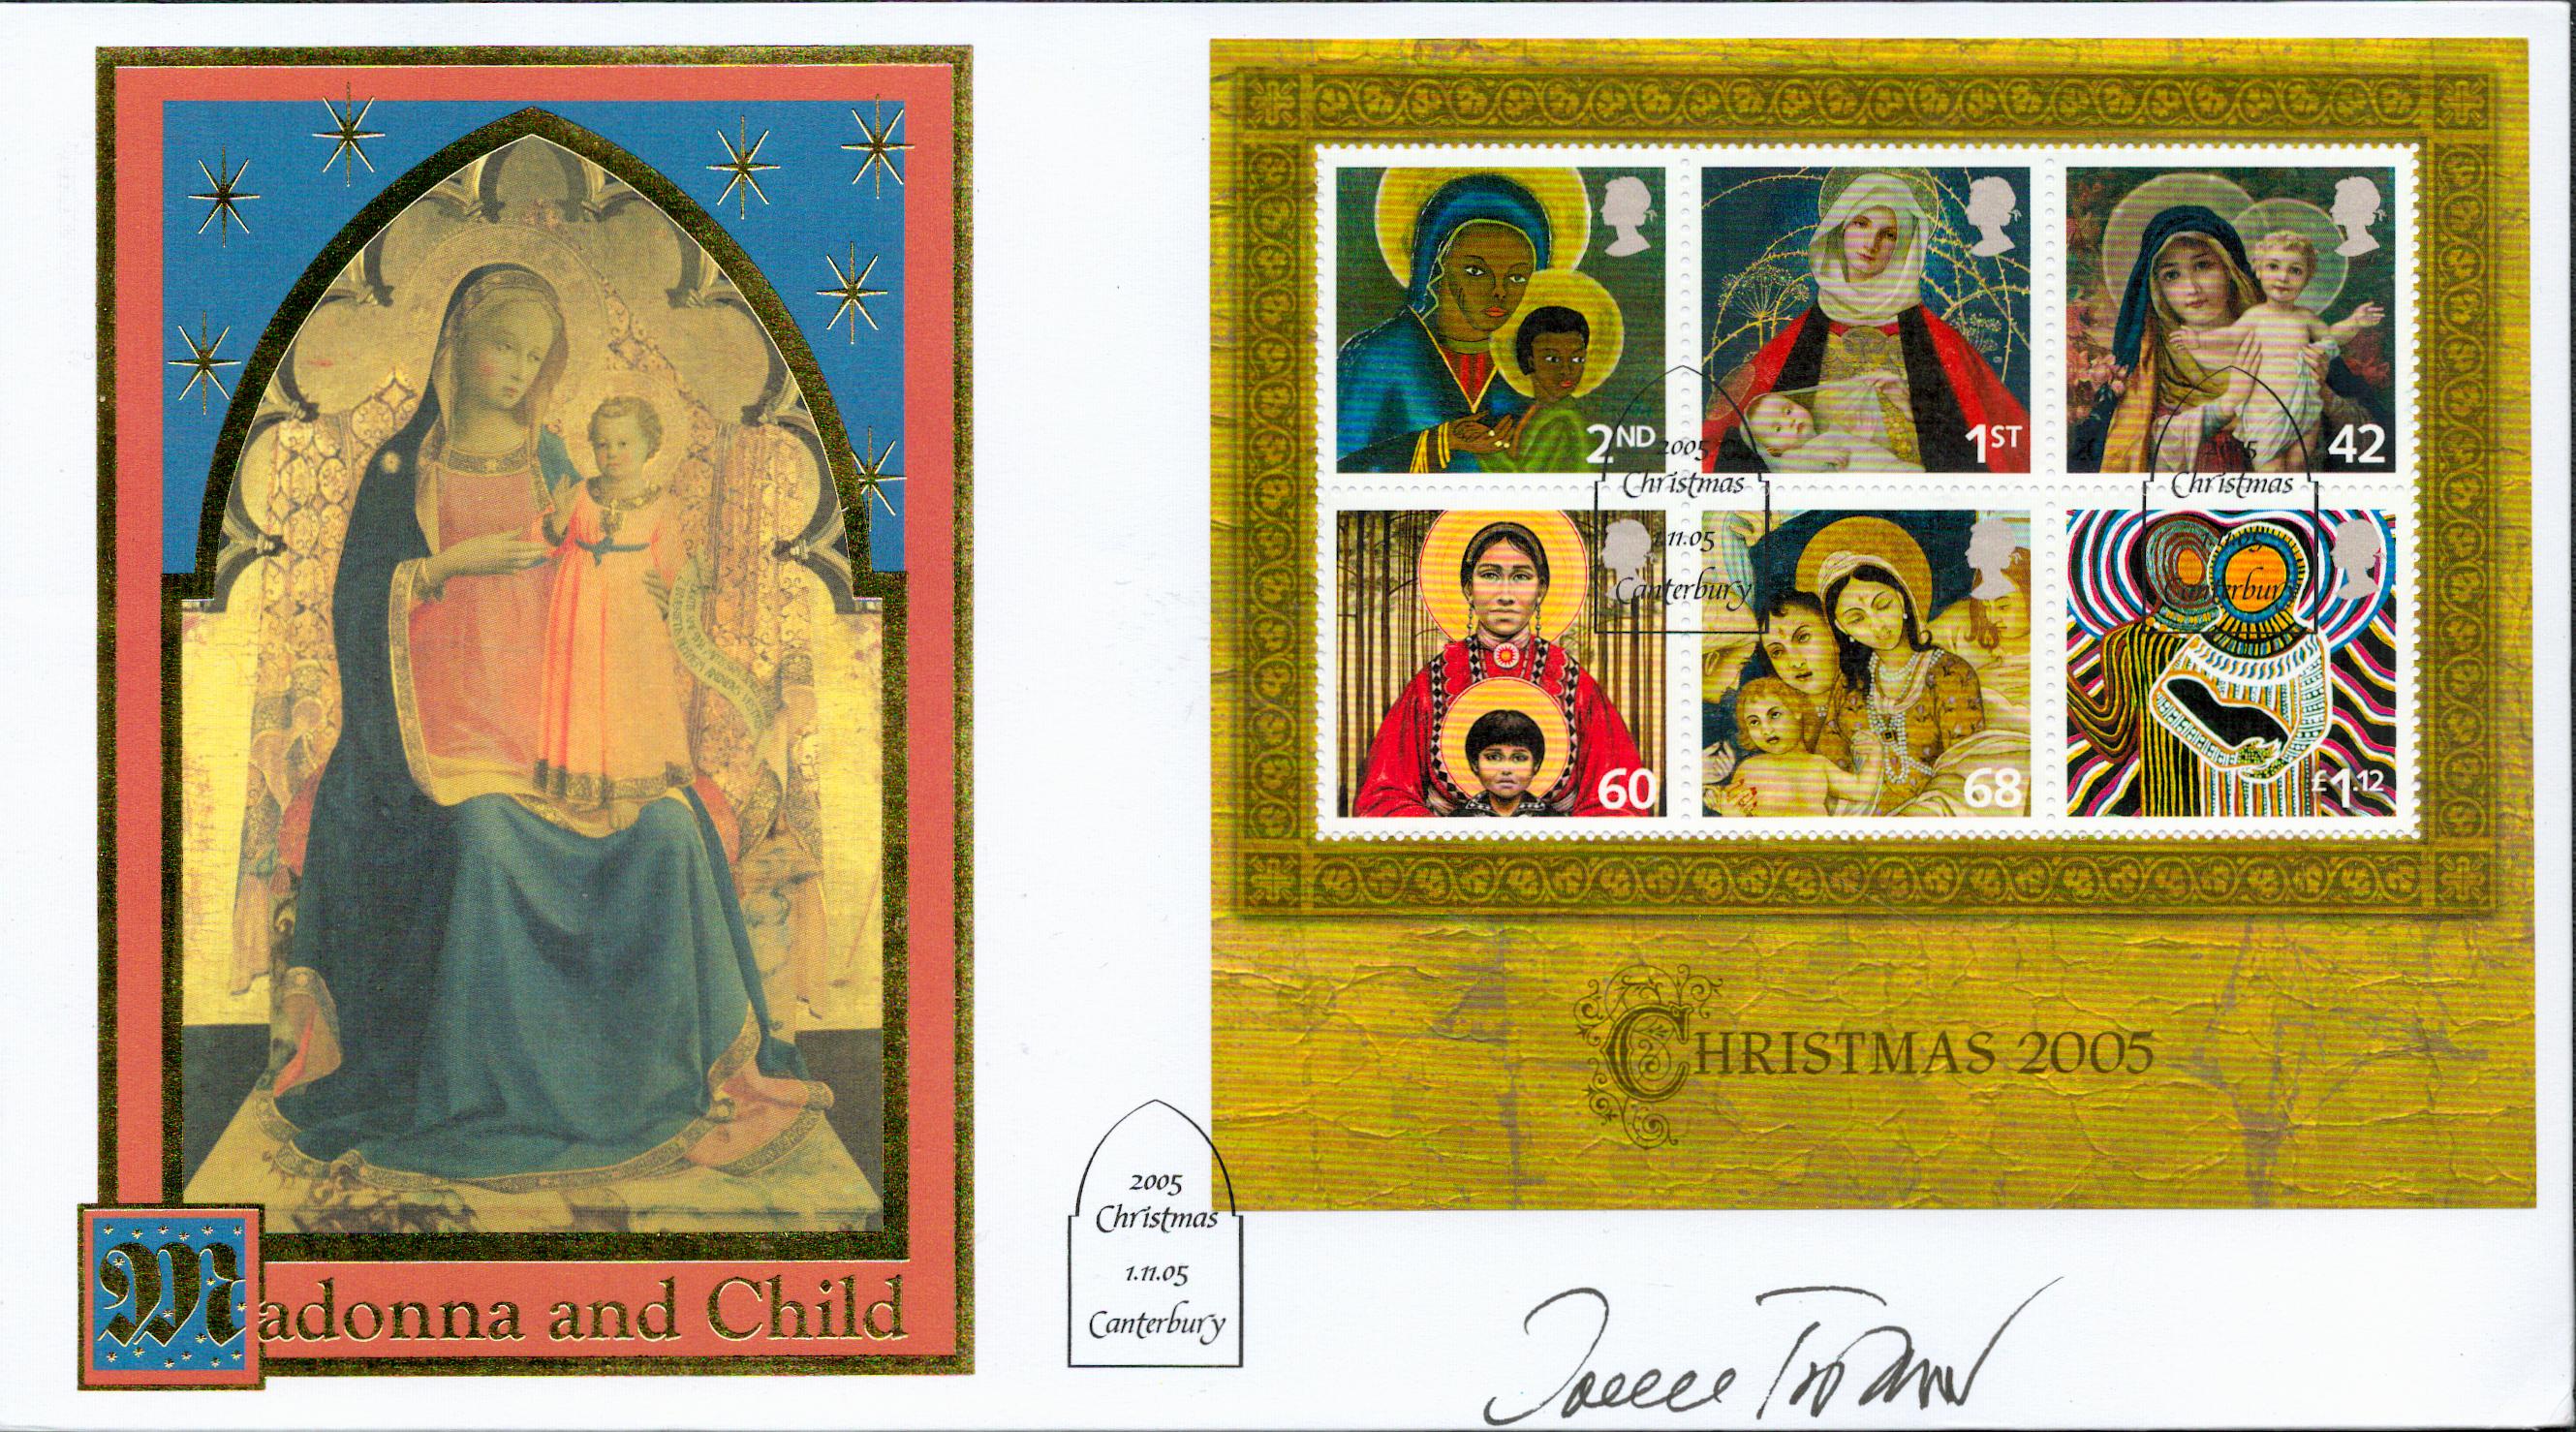 Irene von Treskow signed Christmas 2005 FDC. 1/11/05 Canterbury postmark. All autographs come with a